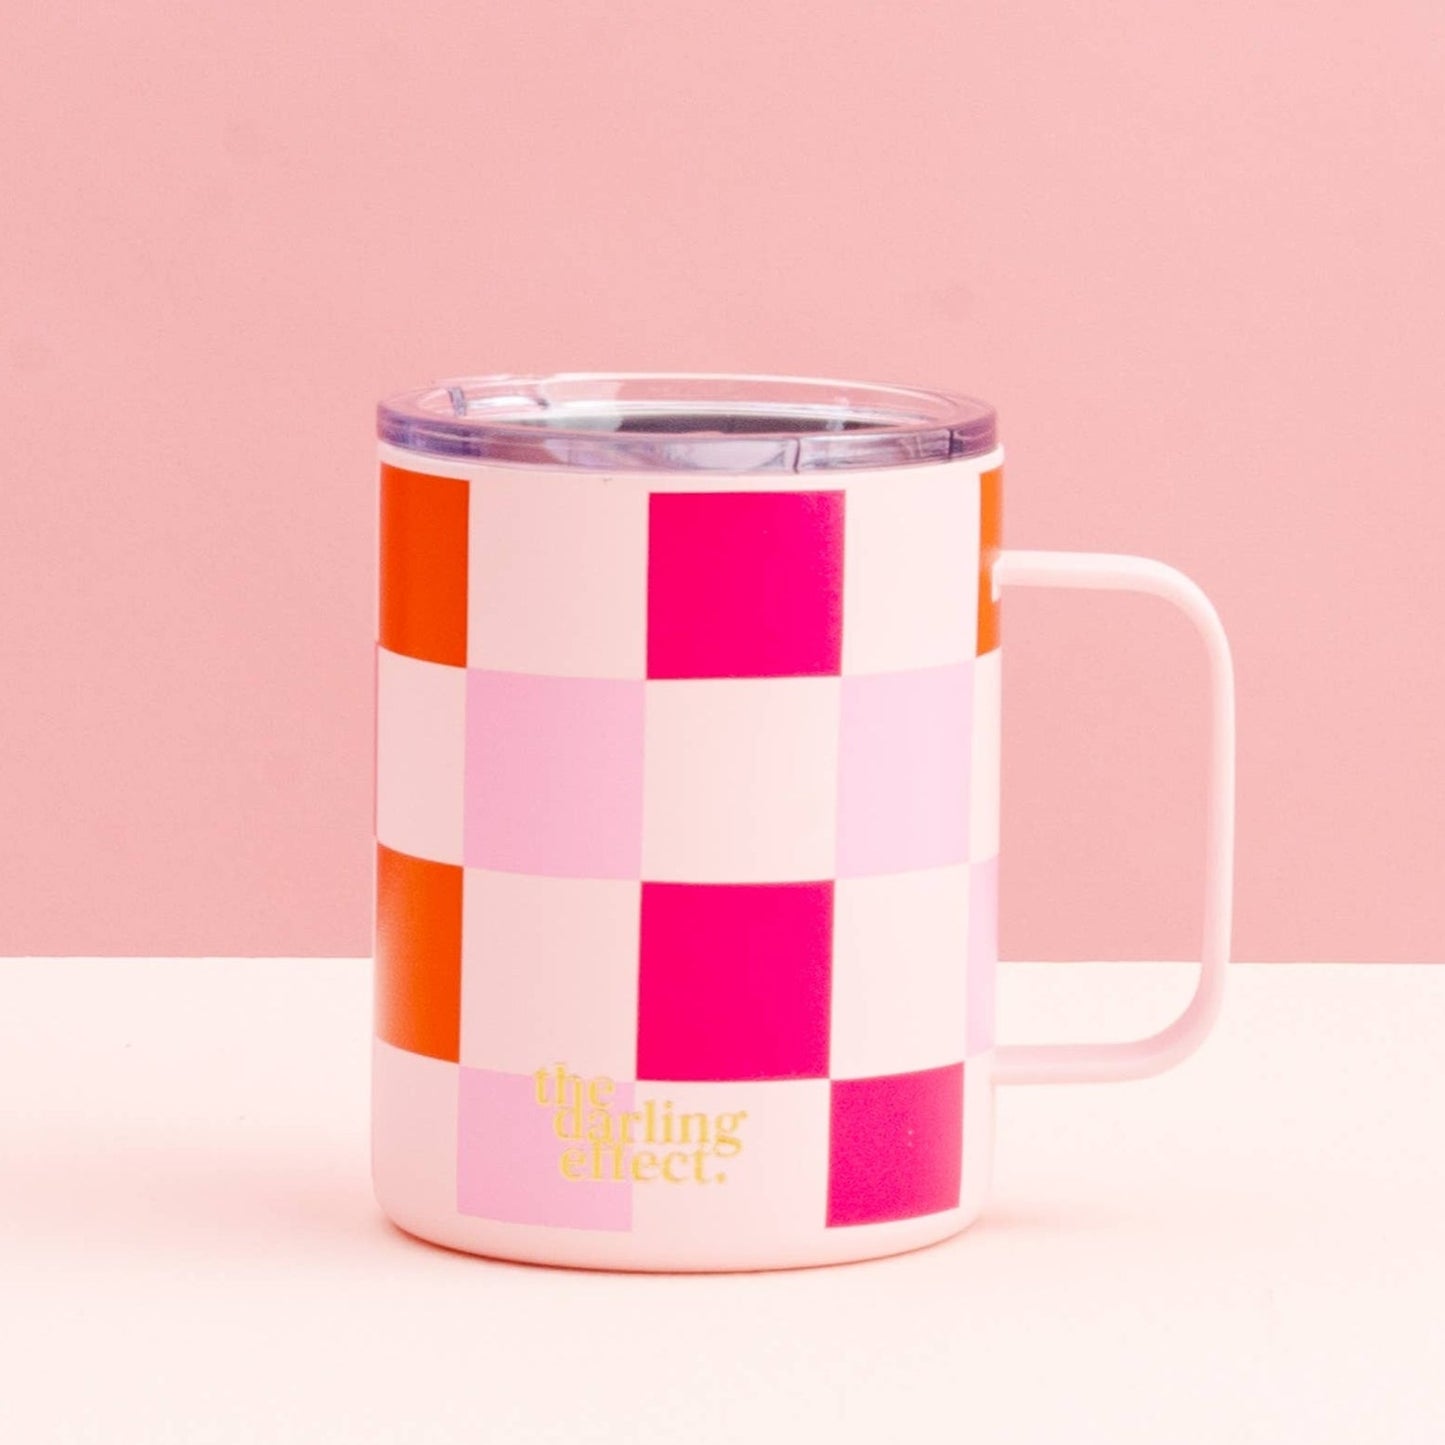 sweetheart check insolated mug on a pink background.